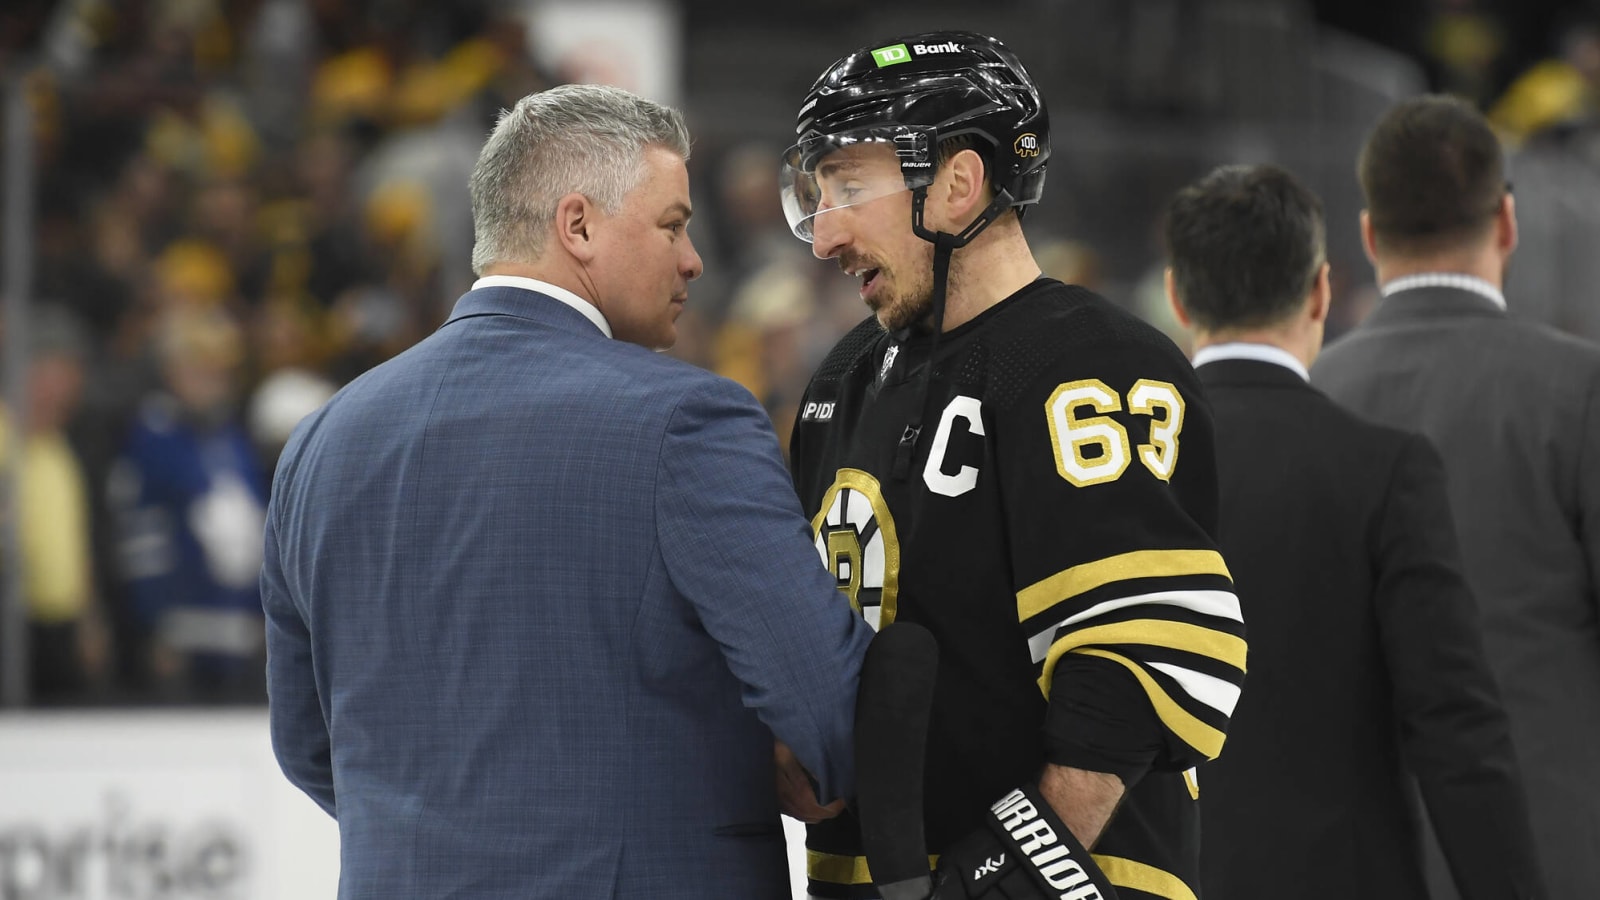 NHL Playoffs: Bruins Must Improve in Key Areas To Extend the Series